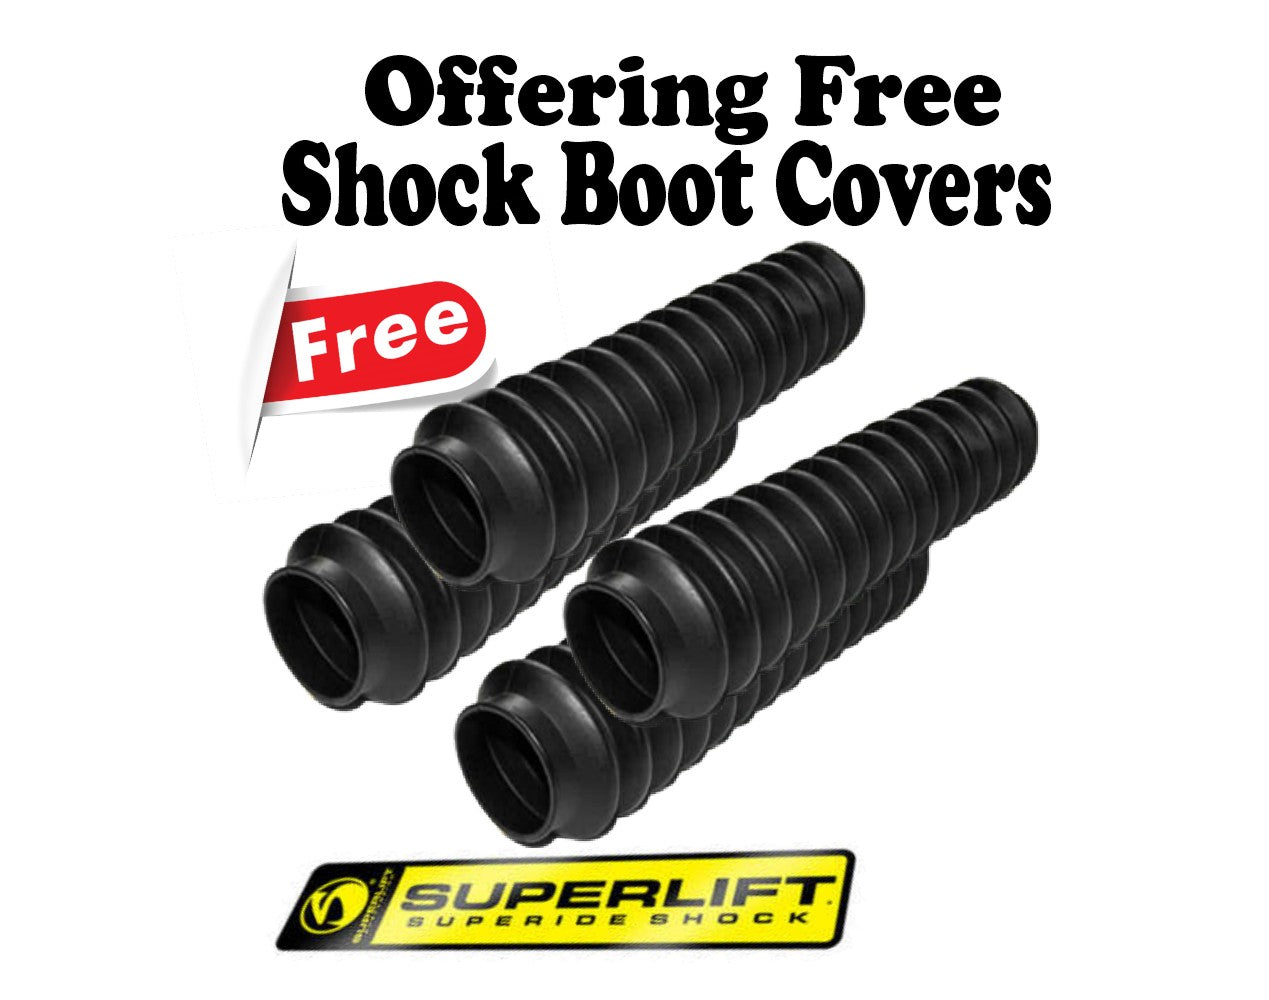 Superlift 2005-2007 Ford F-250 F-350 Super Duty Diesel With Replacement Radius Arms With Fox 2.0 Shocks 4 in. Suspension Lift Kit 4WD K975FX